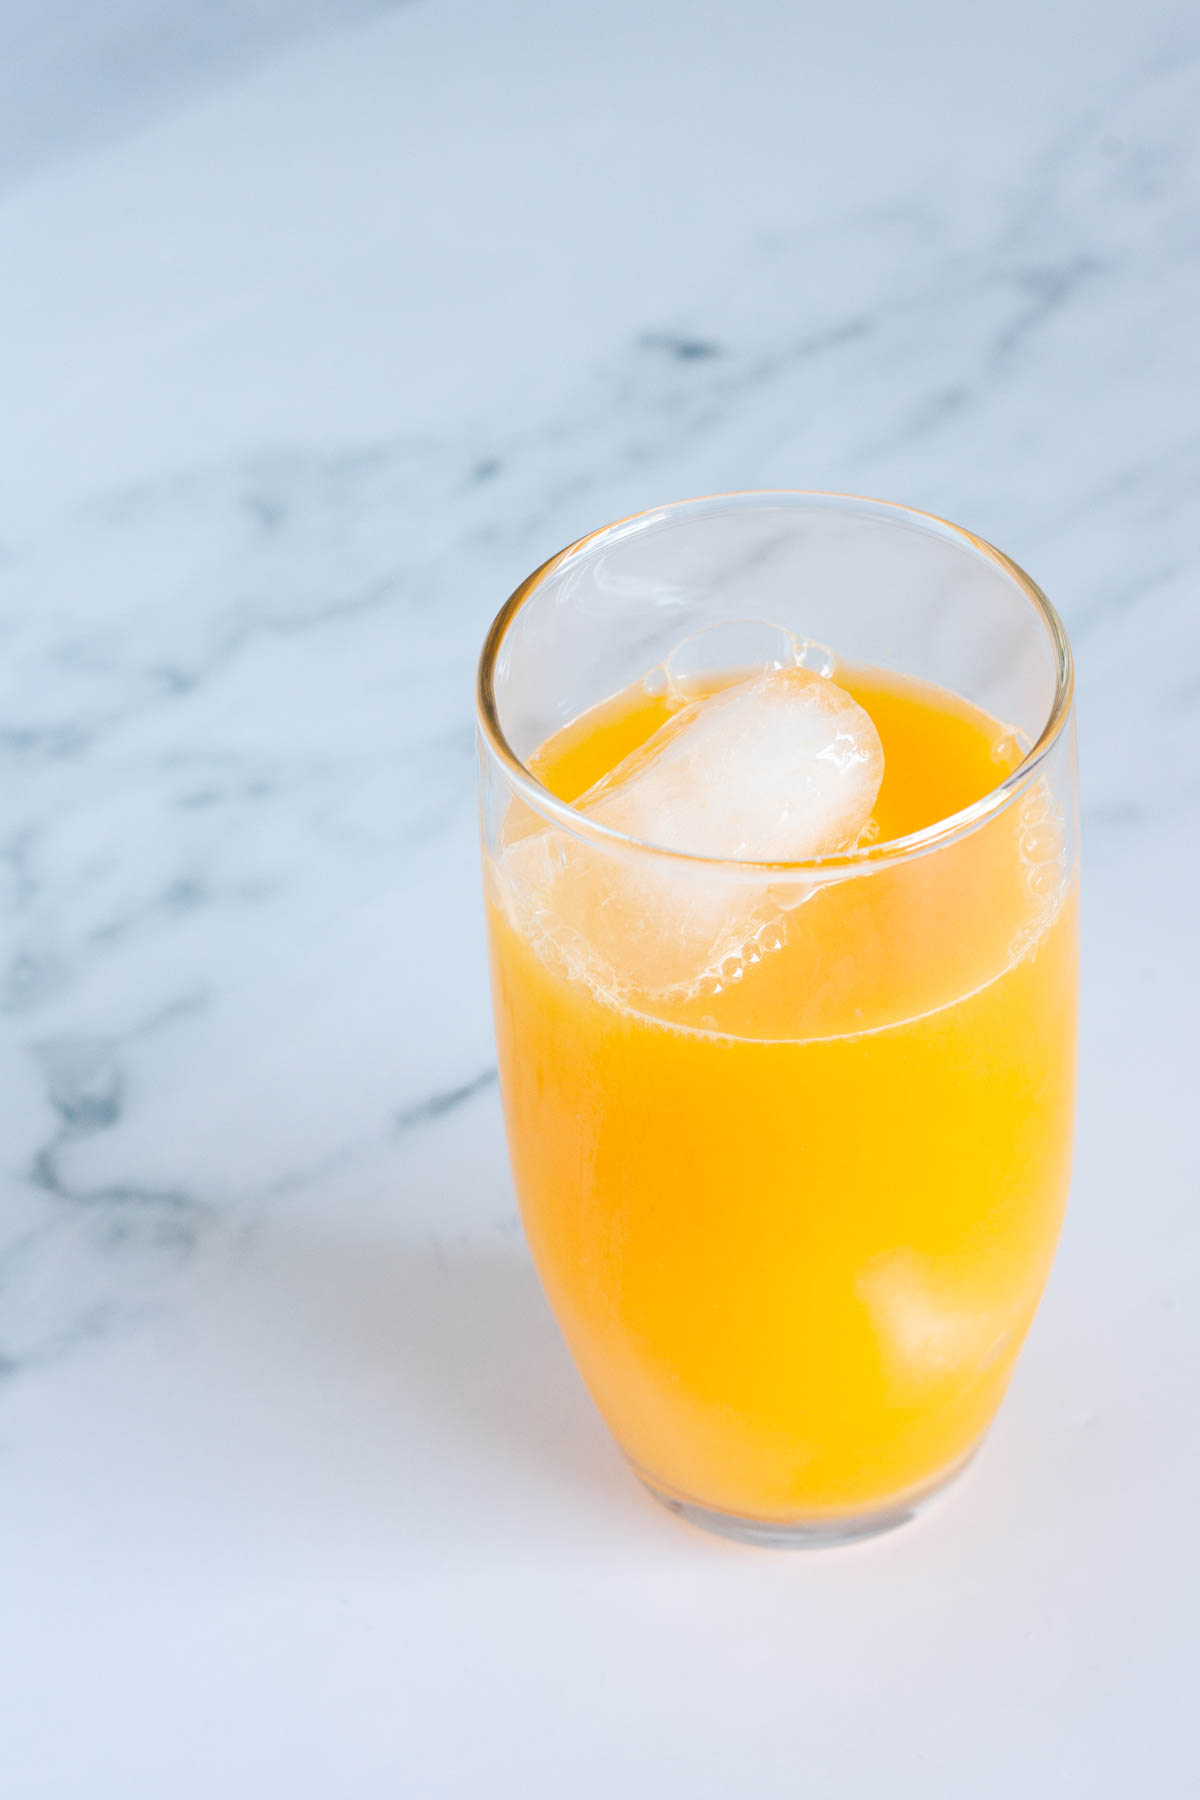 A glass filled with ice and orange juice.